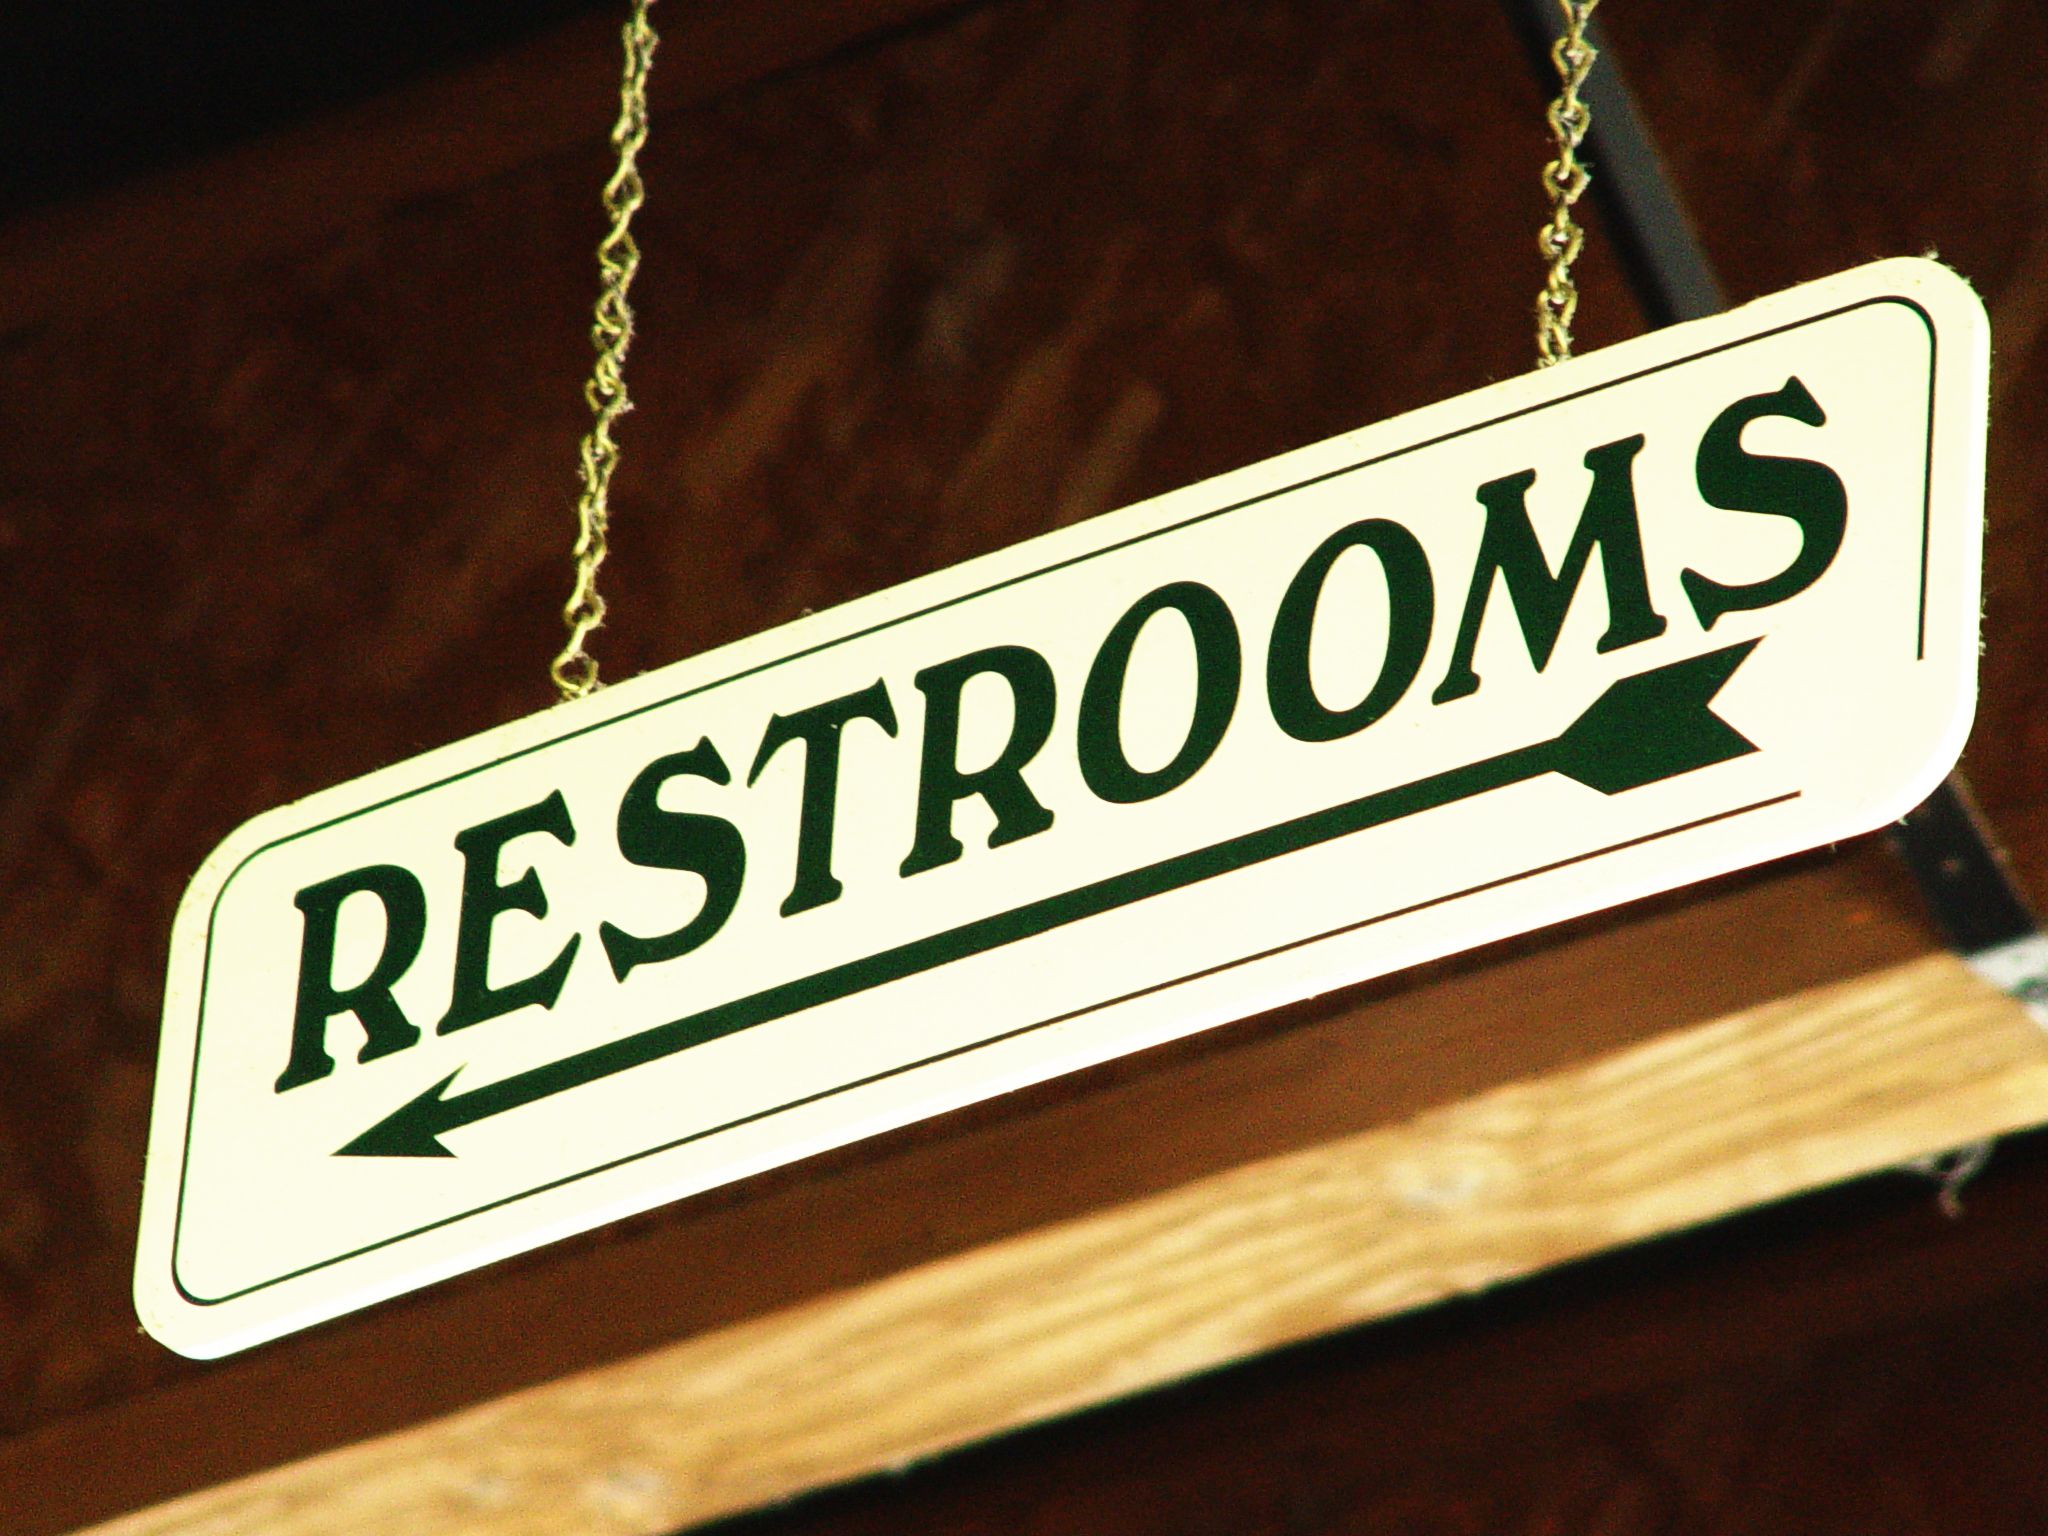 What do Bathrooms and Presidential Races Have in Common?